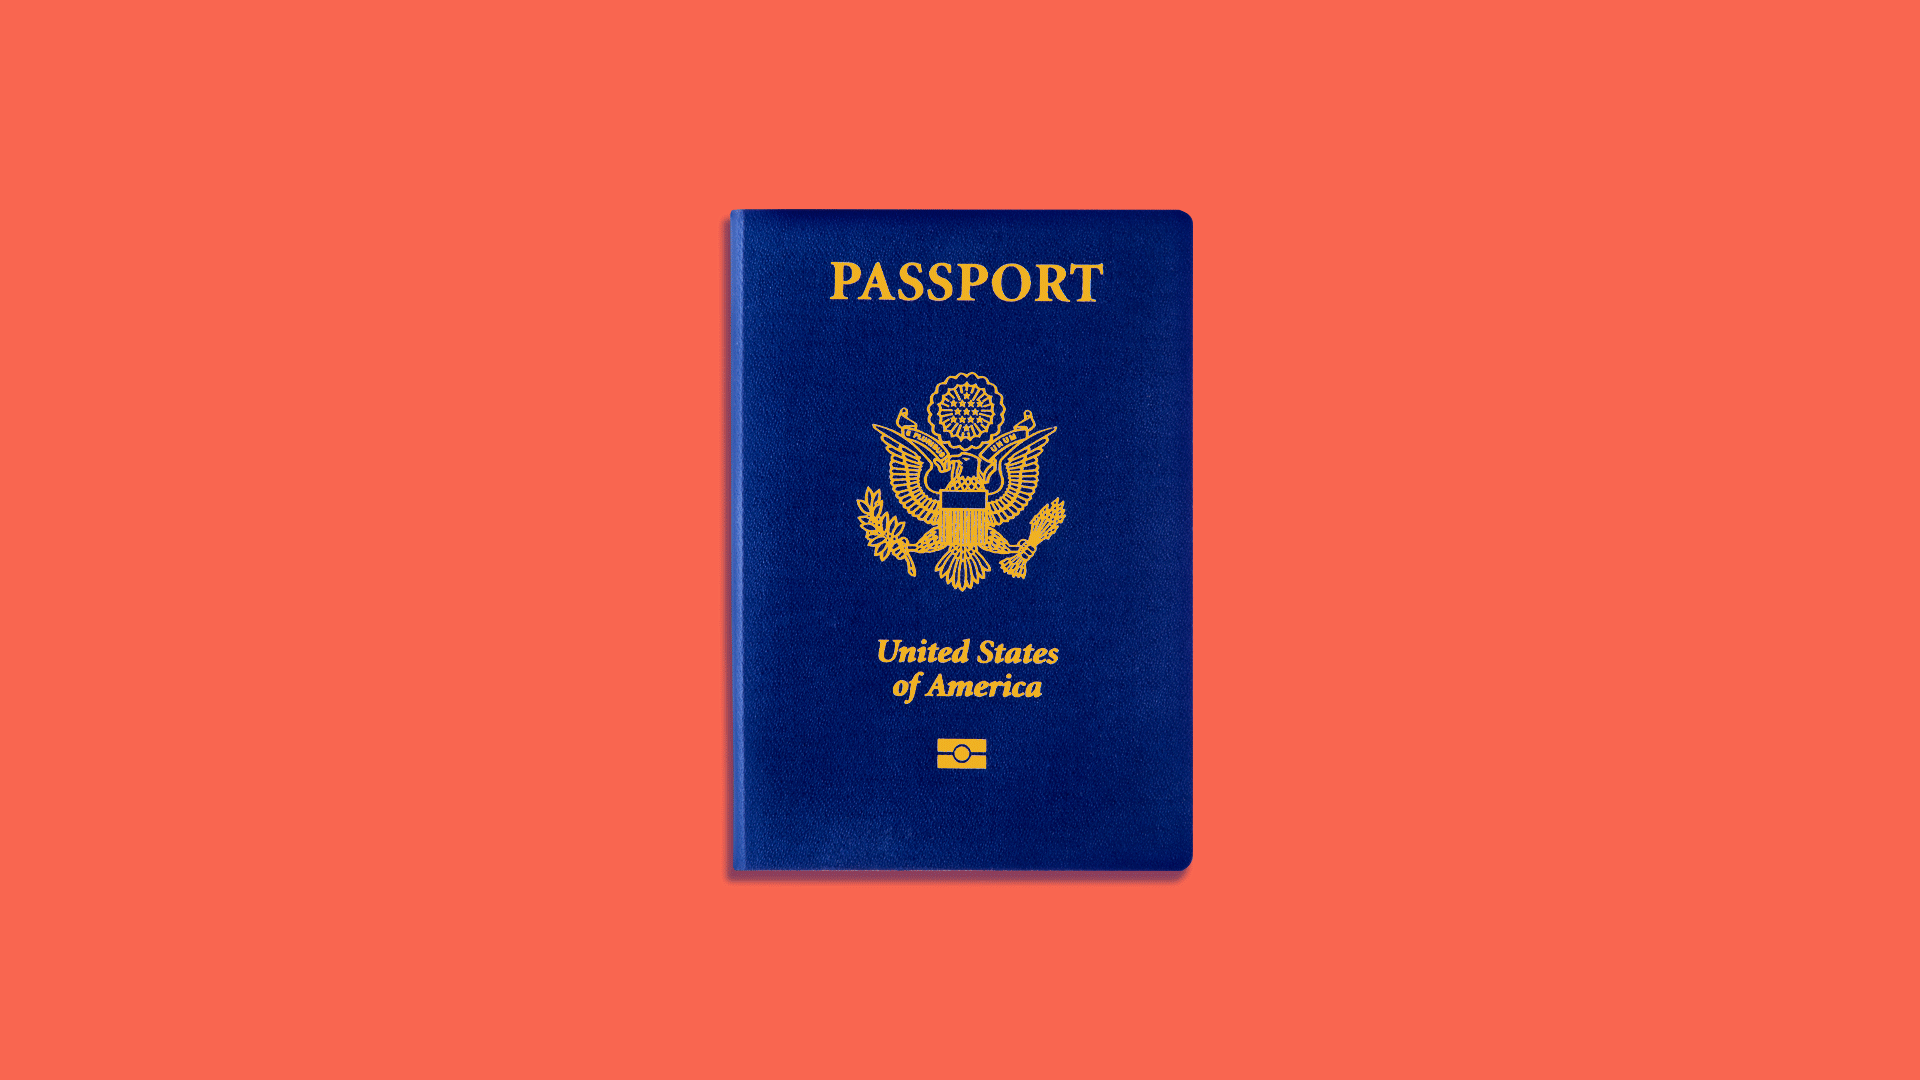 Animated illustration of US passports filling the screen.